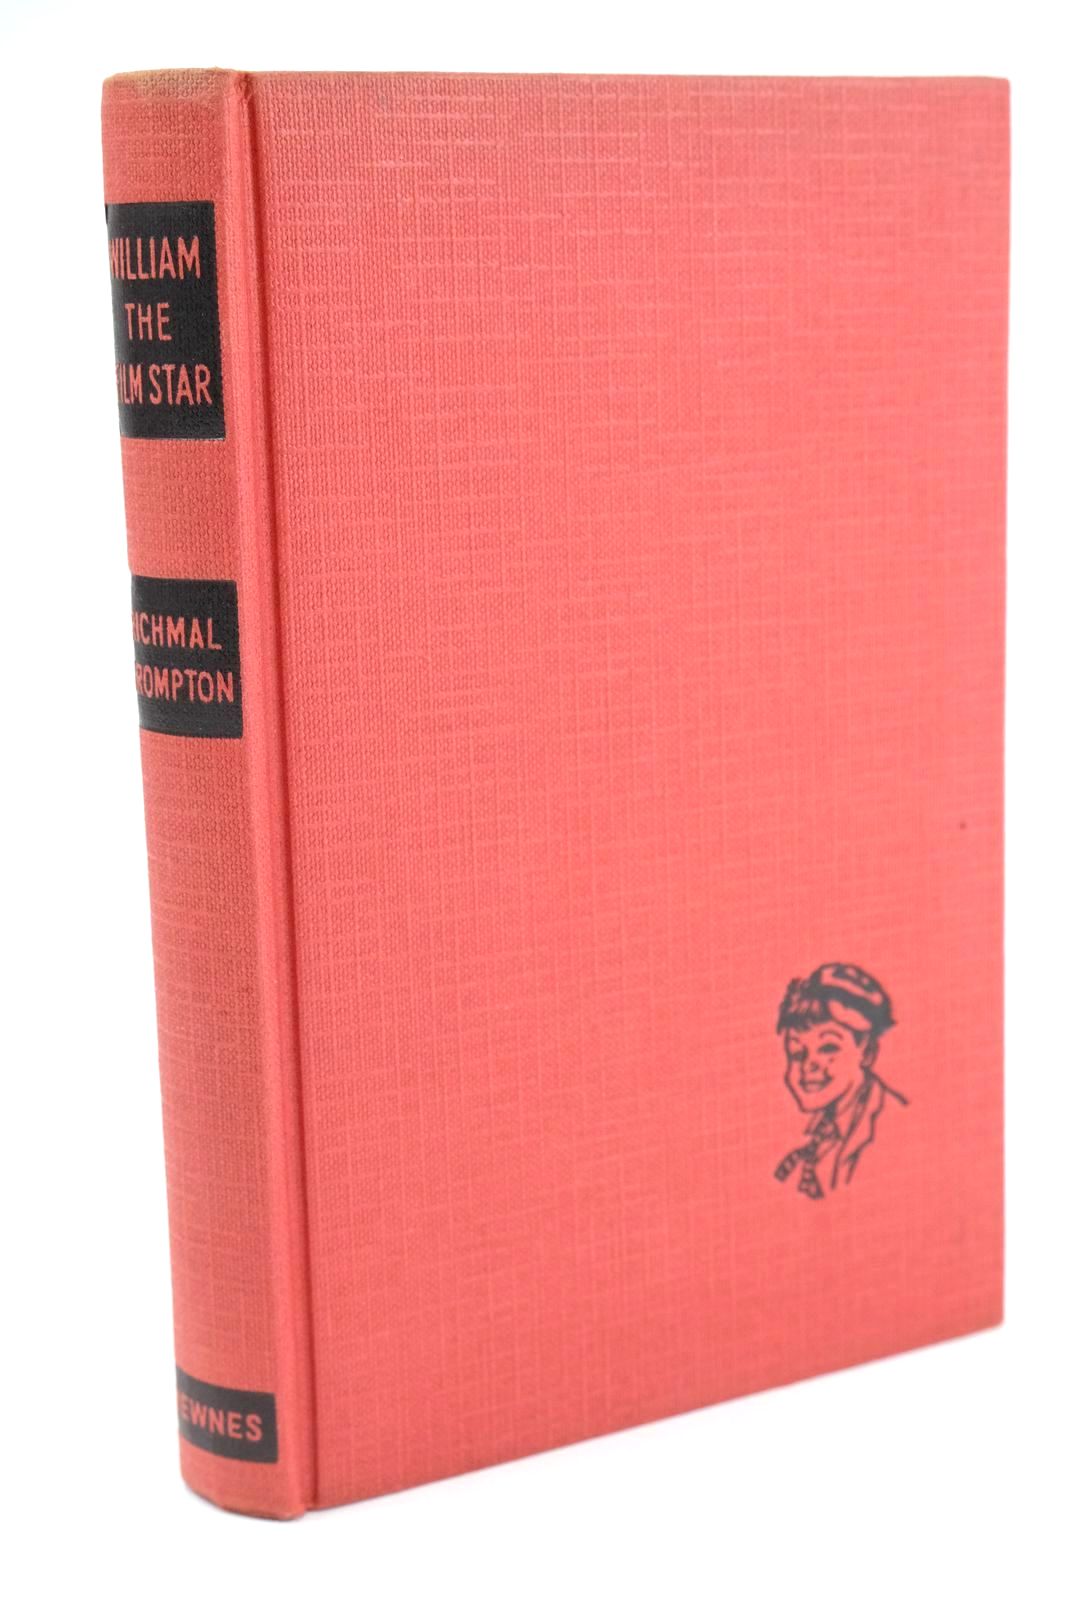 Photo of WILLIAM THE FILM STAR written by Crompton, Richmal illustrated by Henry, Thomas published by George Newnes Limited (STOCK CODE: 1324725)  for sale by Stella & Rose's Books